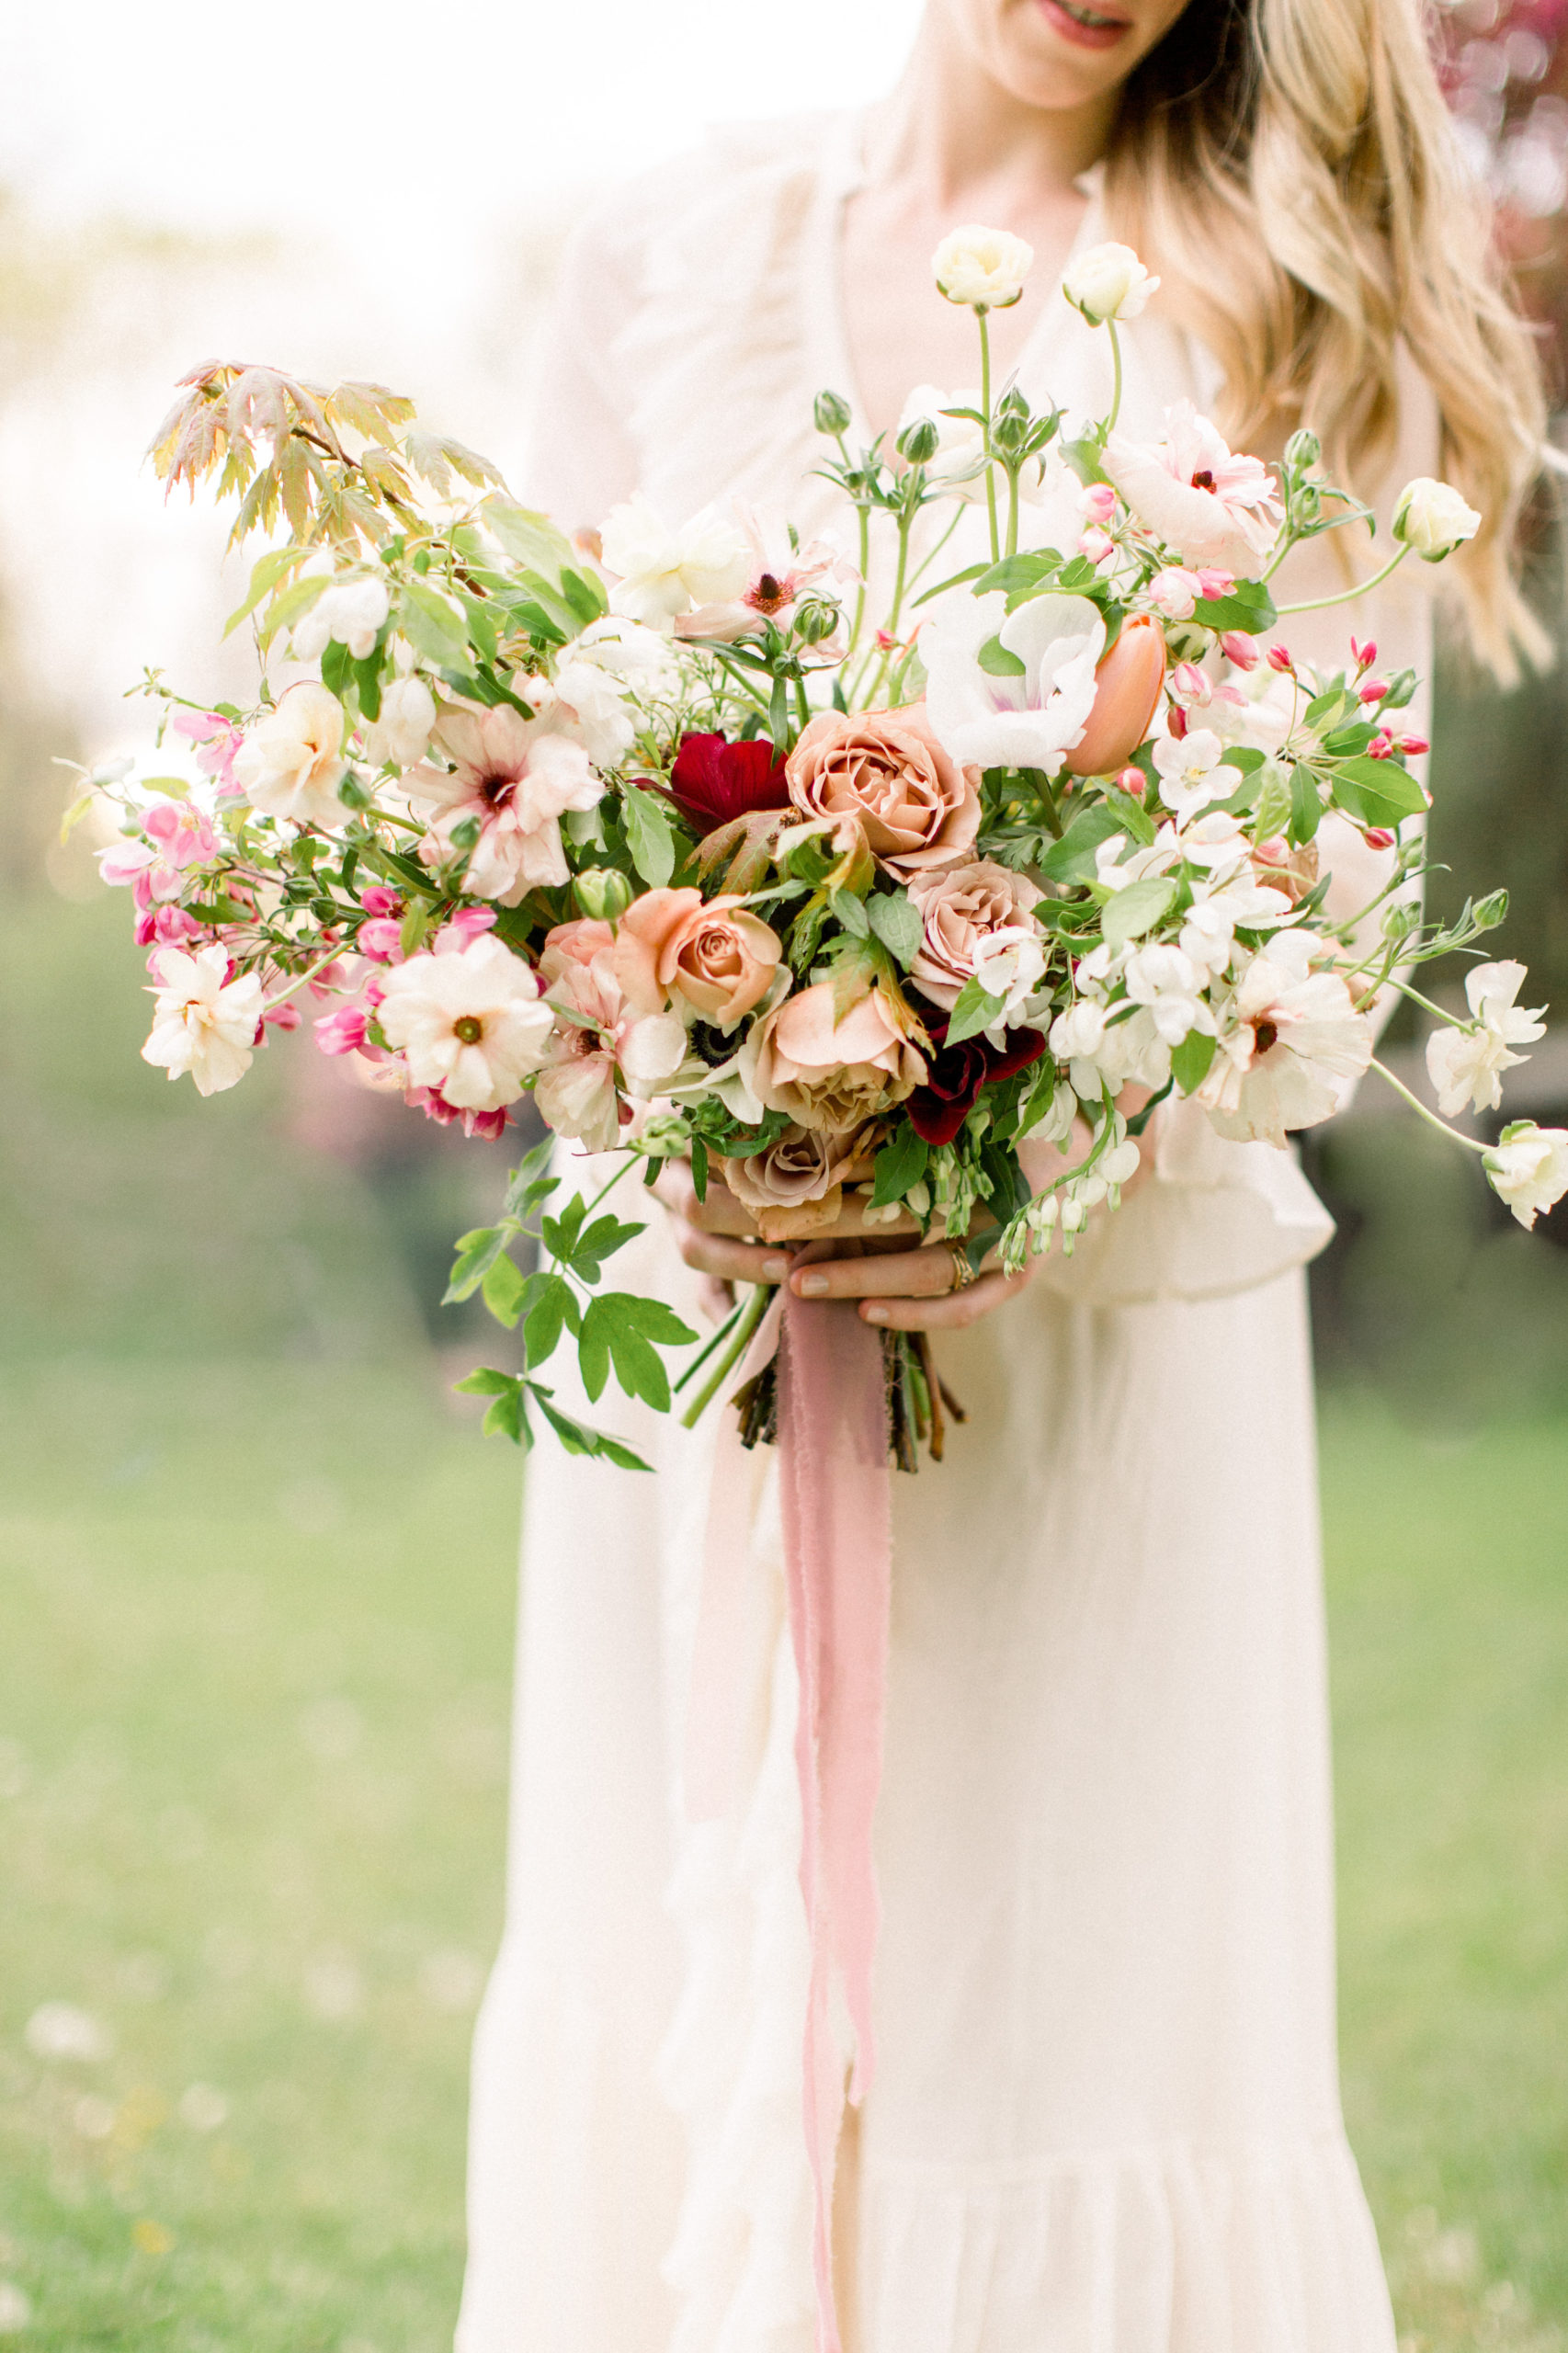 spring bridal bouquet by Studio fleurette with mauve garden roses, burgundy anemone, butterfly ranunculus and appleblossoms.